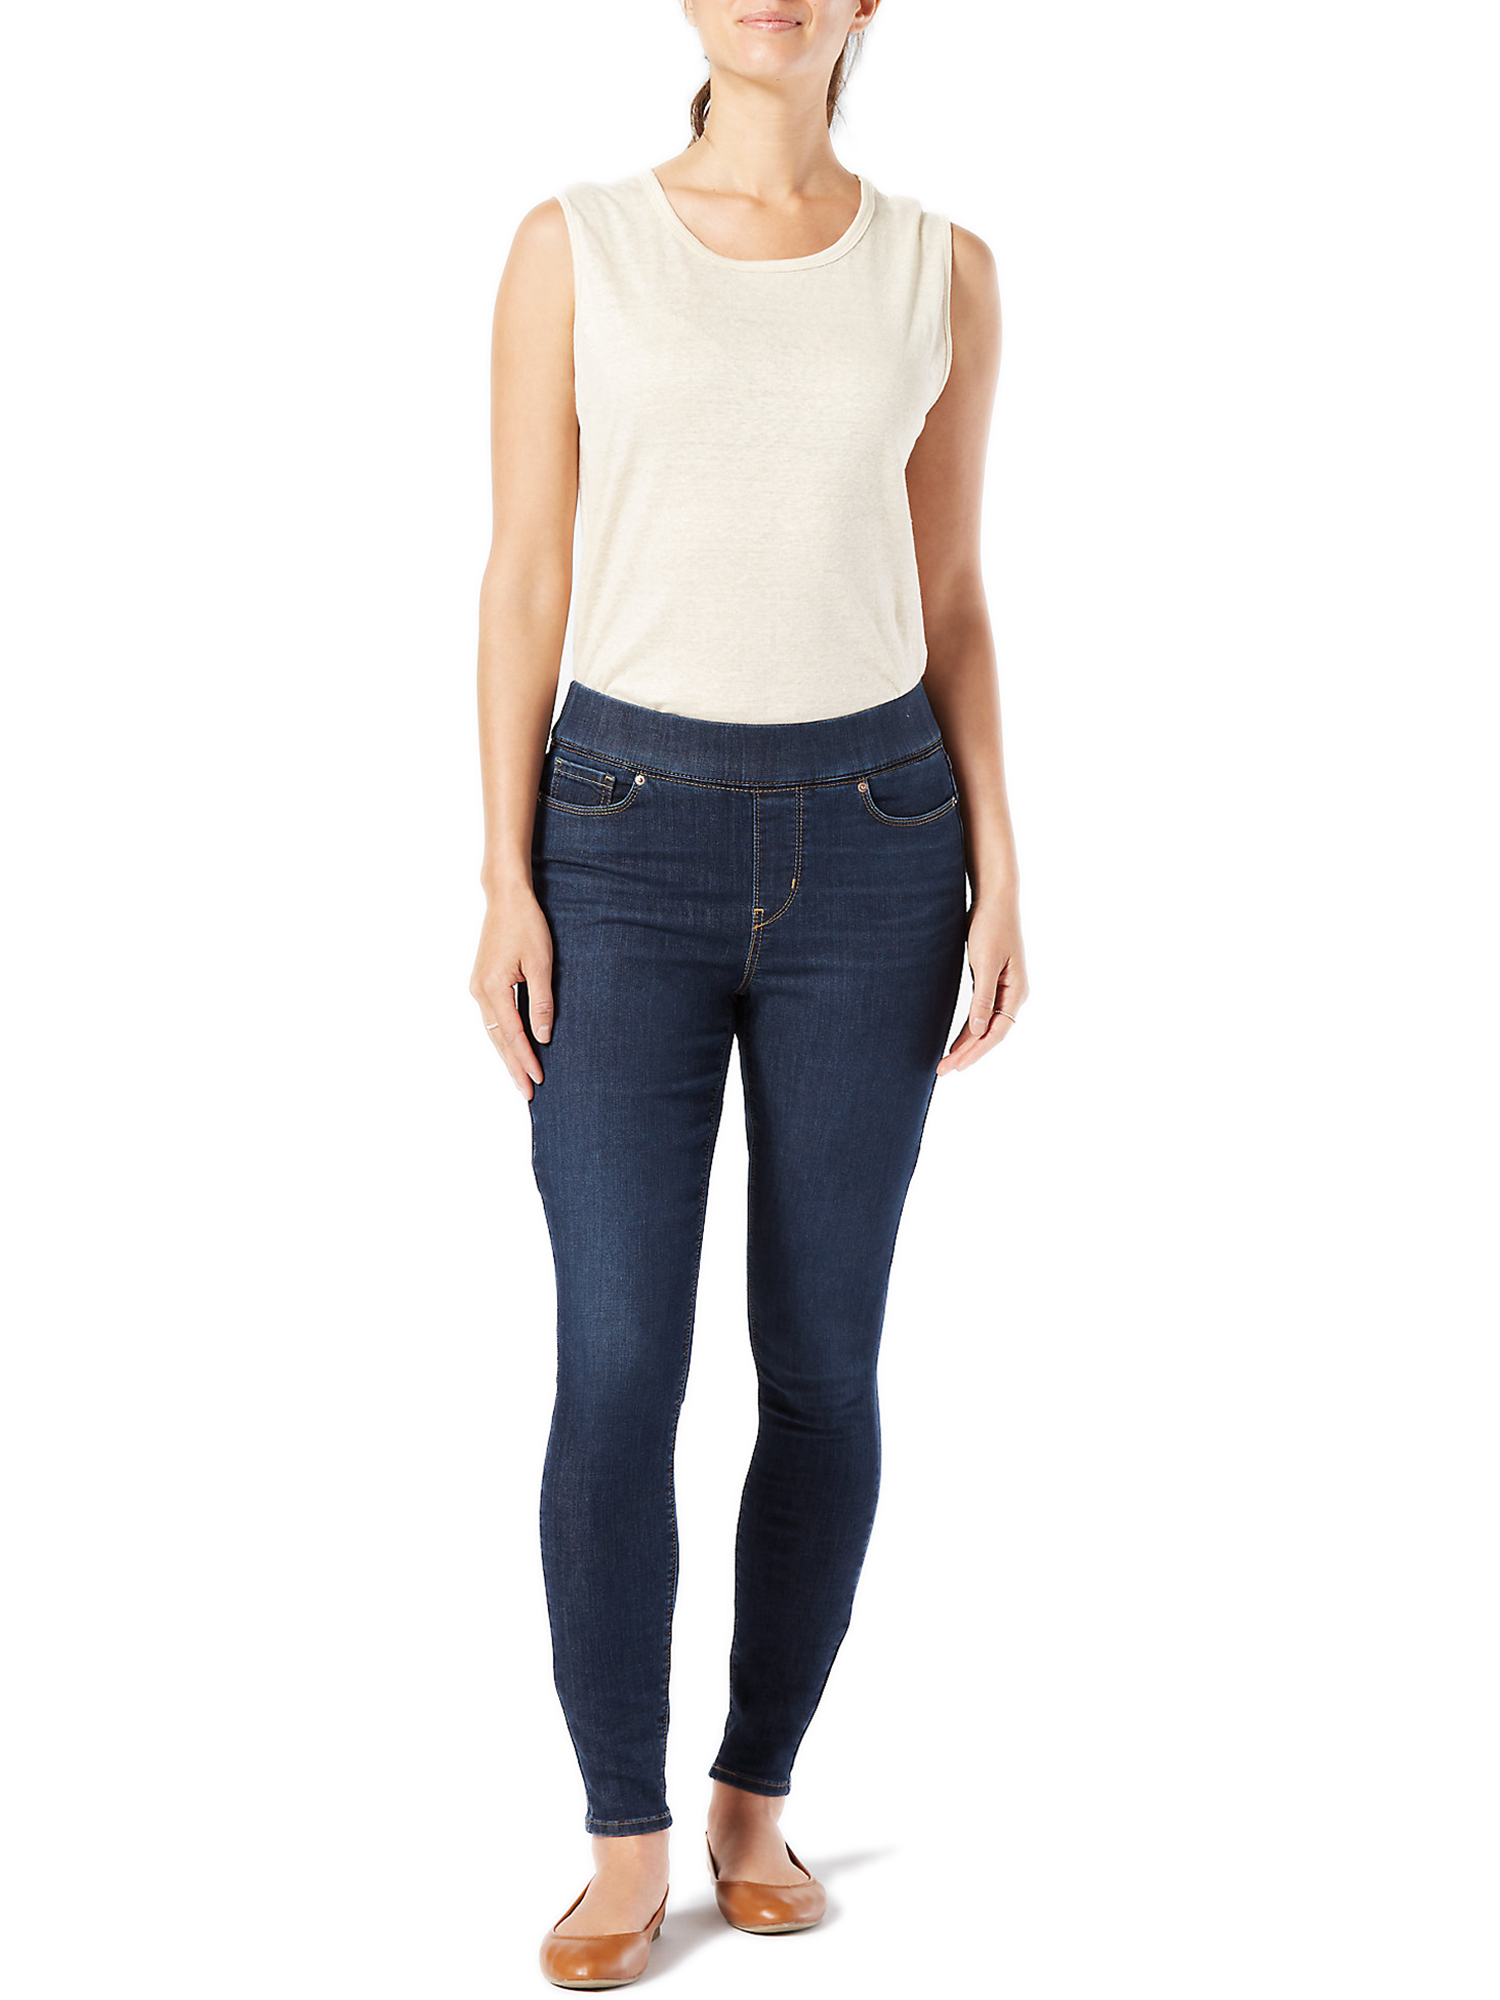 Signature by Levi Strauss & Co. Women's Simply Stretch Shaping Pull-On Super Skinny Jeans - image 2 of 6